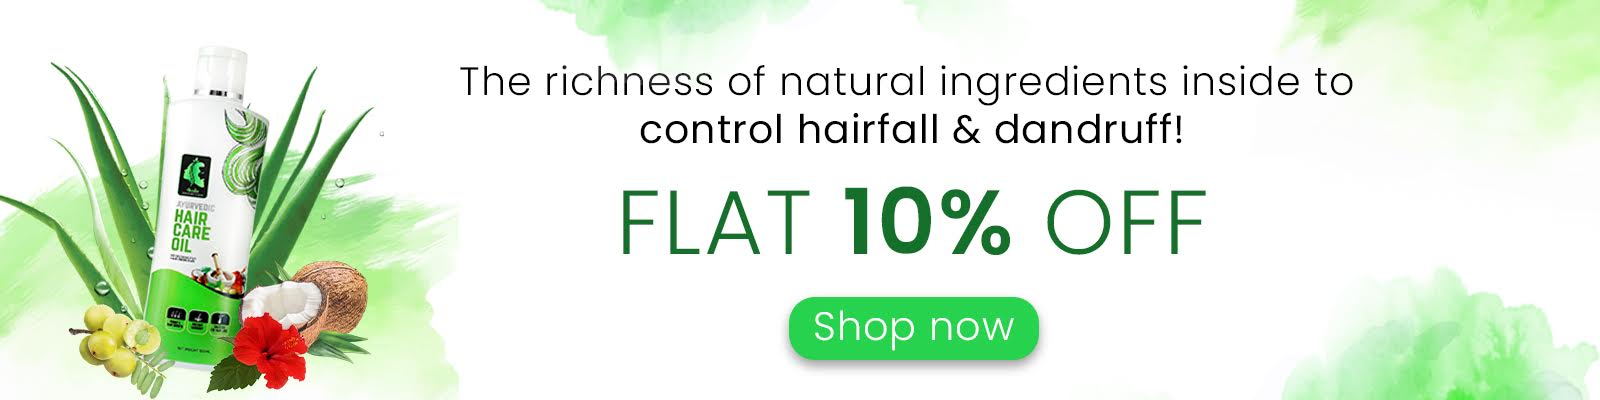 Thalir Ayurvedic Hair care product offer page